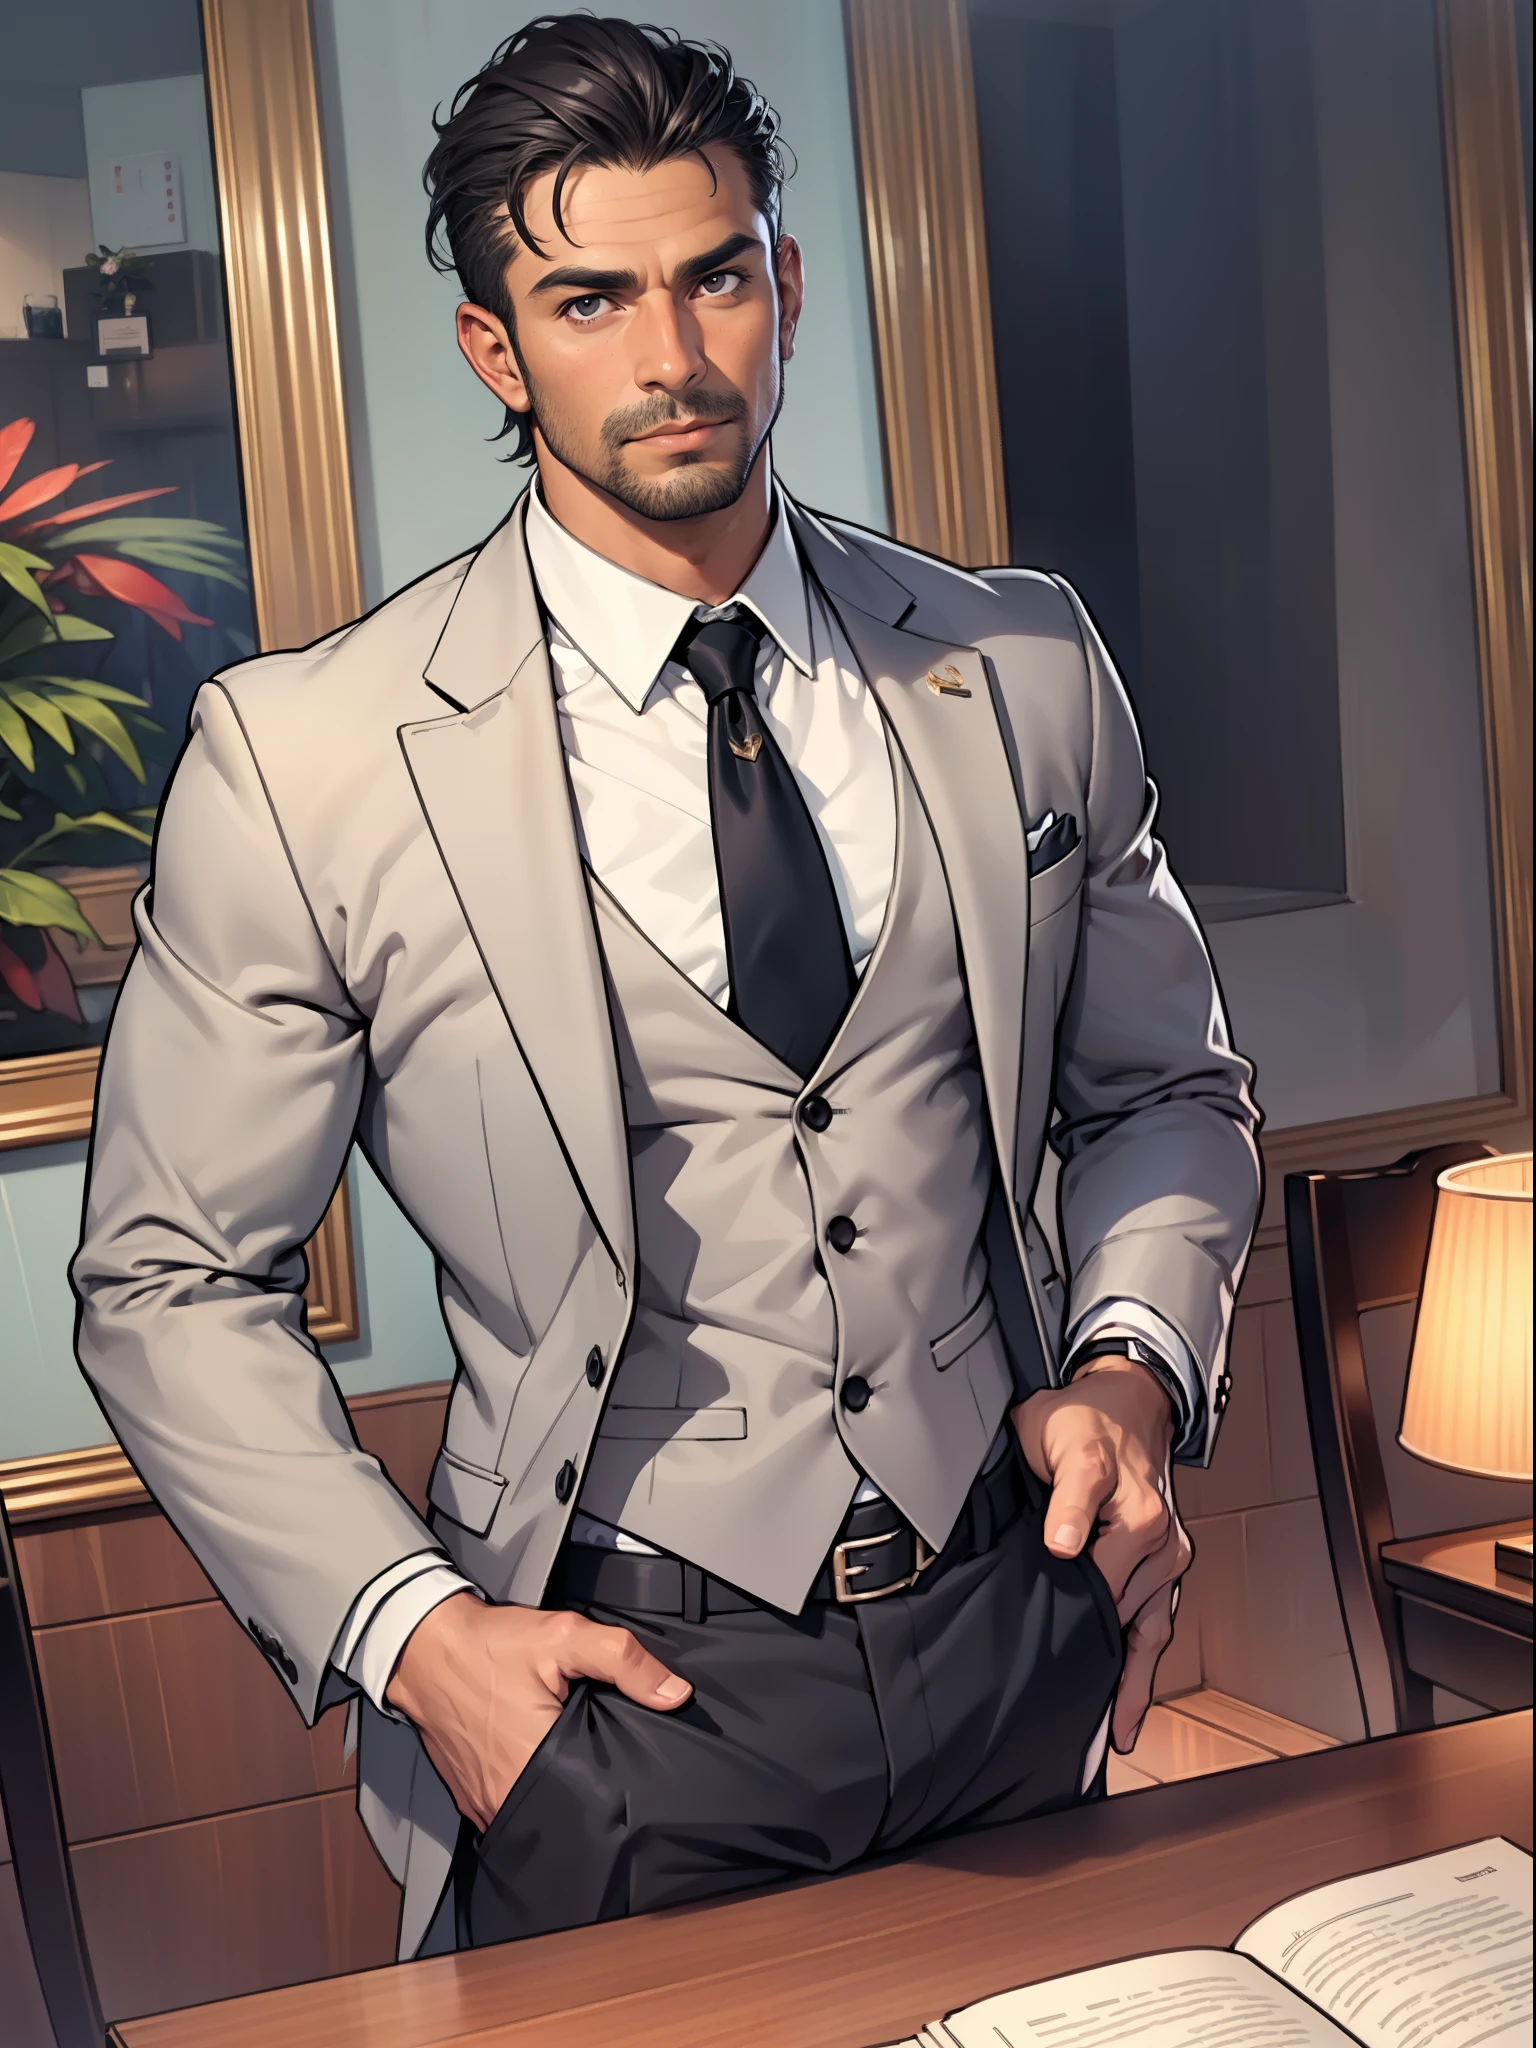 sexy mature daddy, tanned-skin, darker skin, stubble, muscular, sophisticated diplomat, elegant embassy setting, formal attire, diplomatic poise